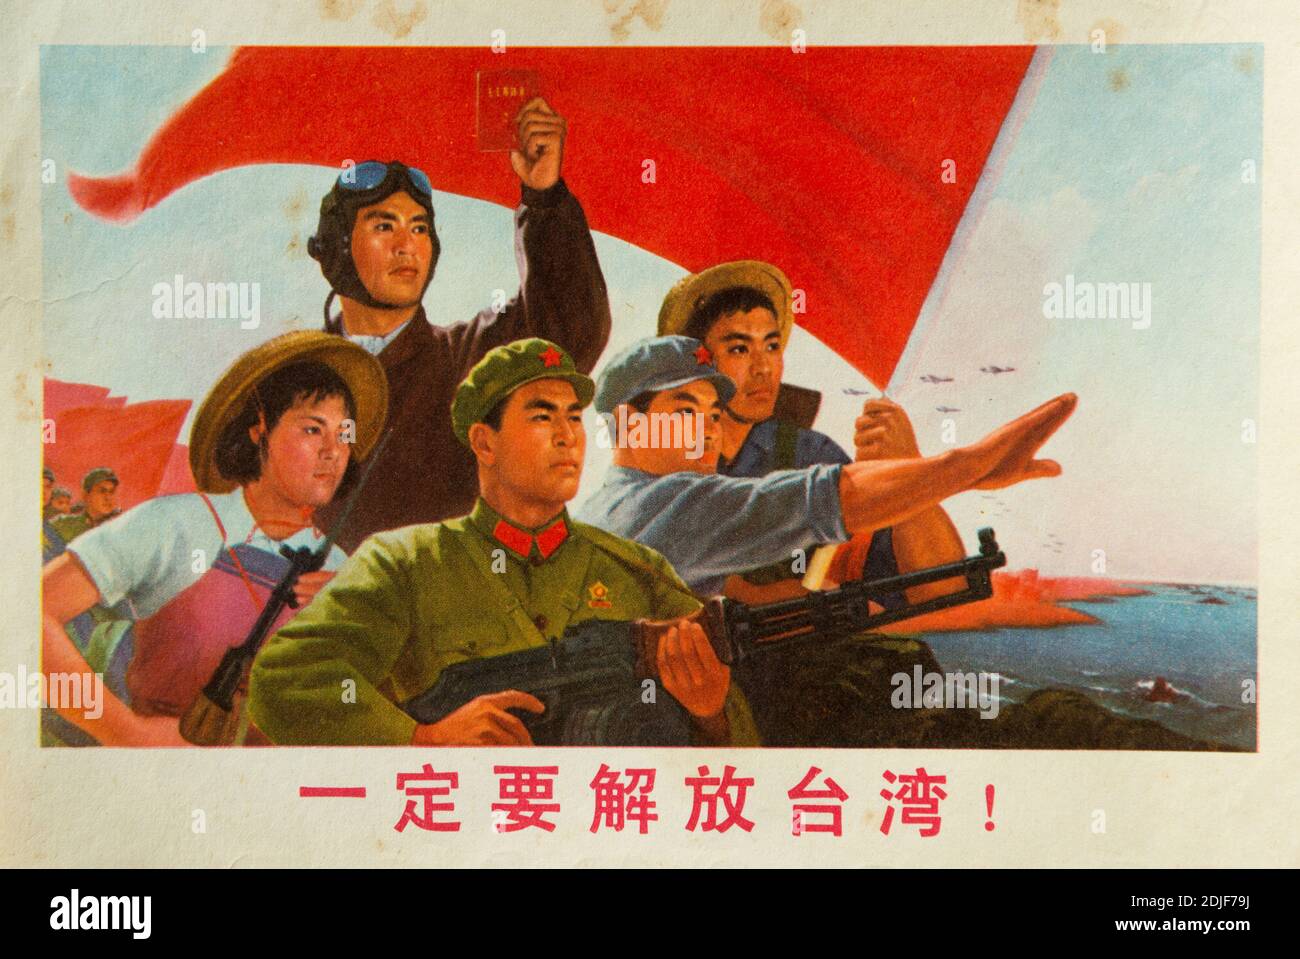 A genuine propaganda poster during the Cultural Revolution in China. We must liberate Taiwan! Stock Photo